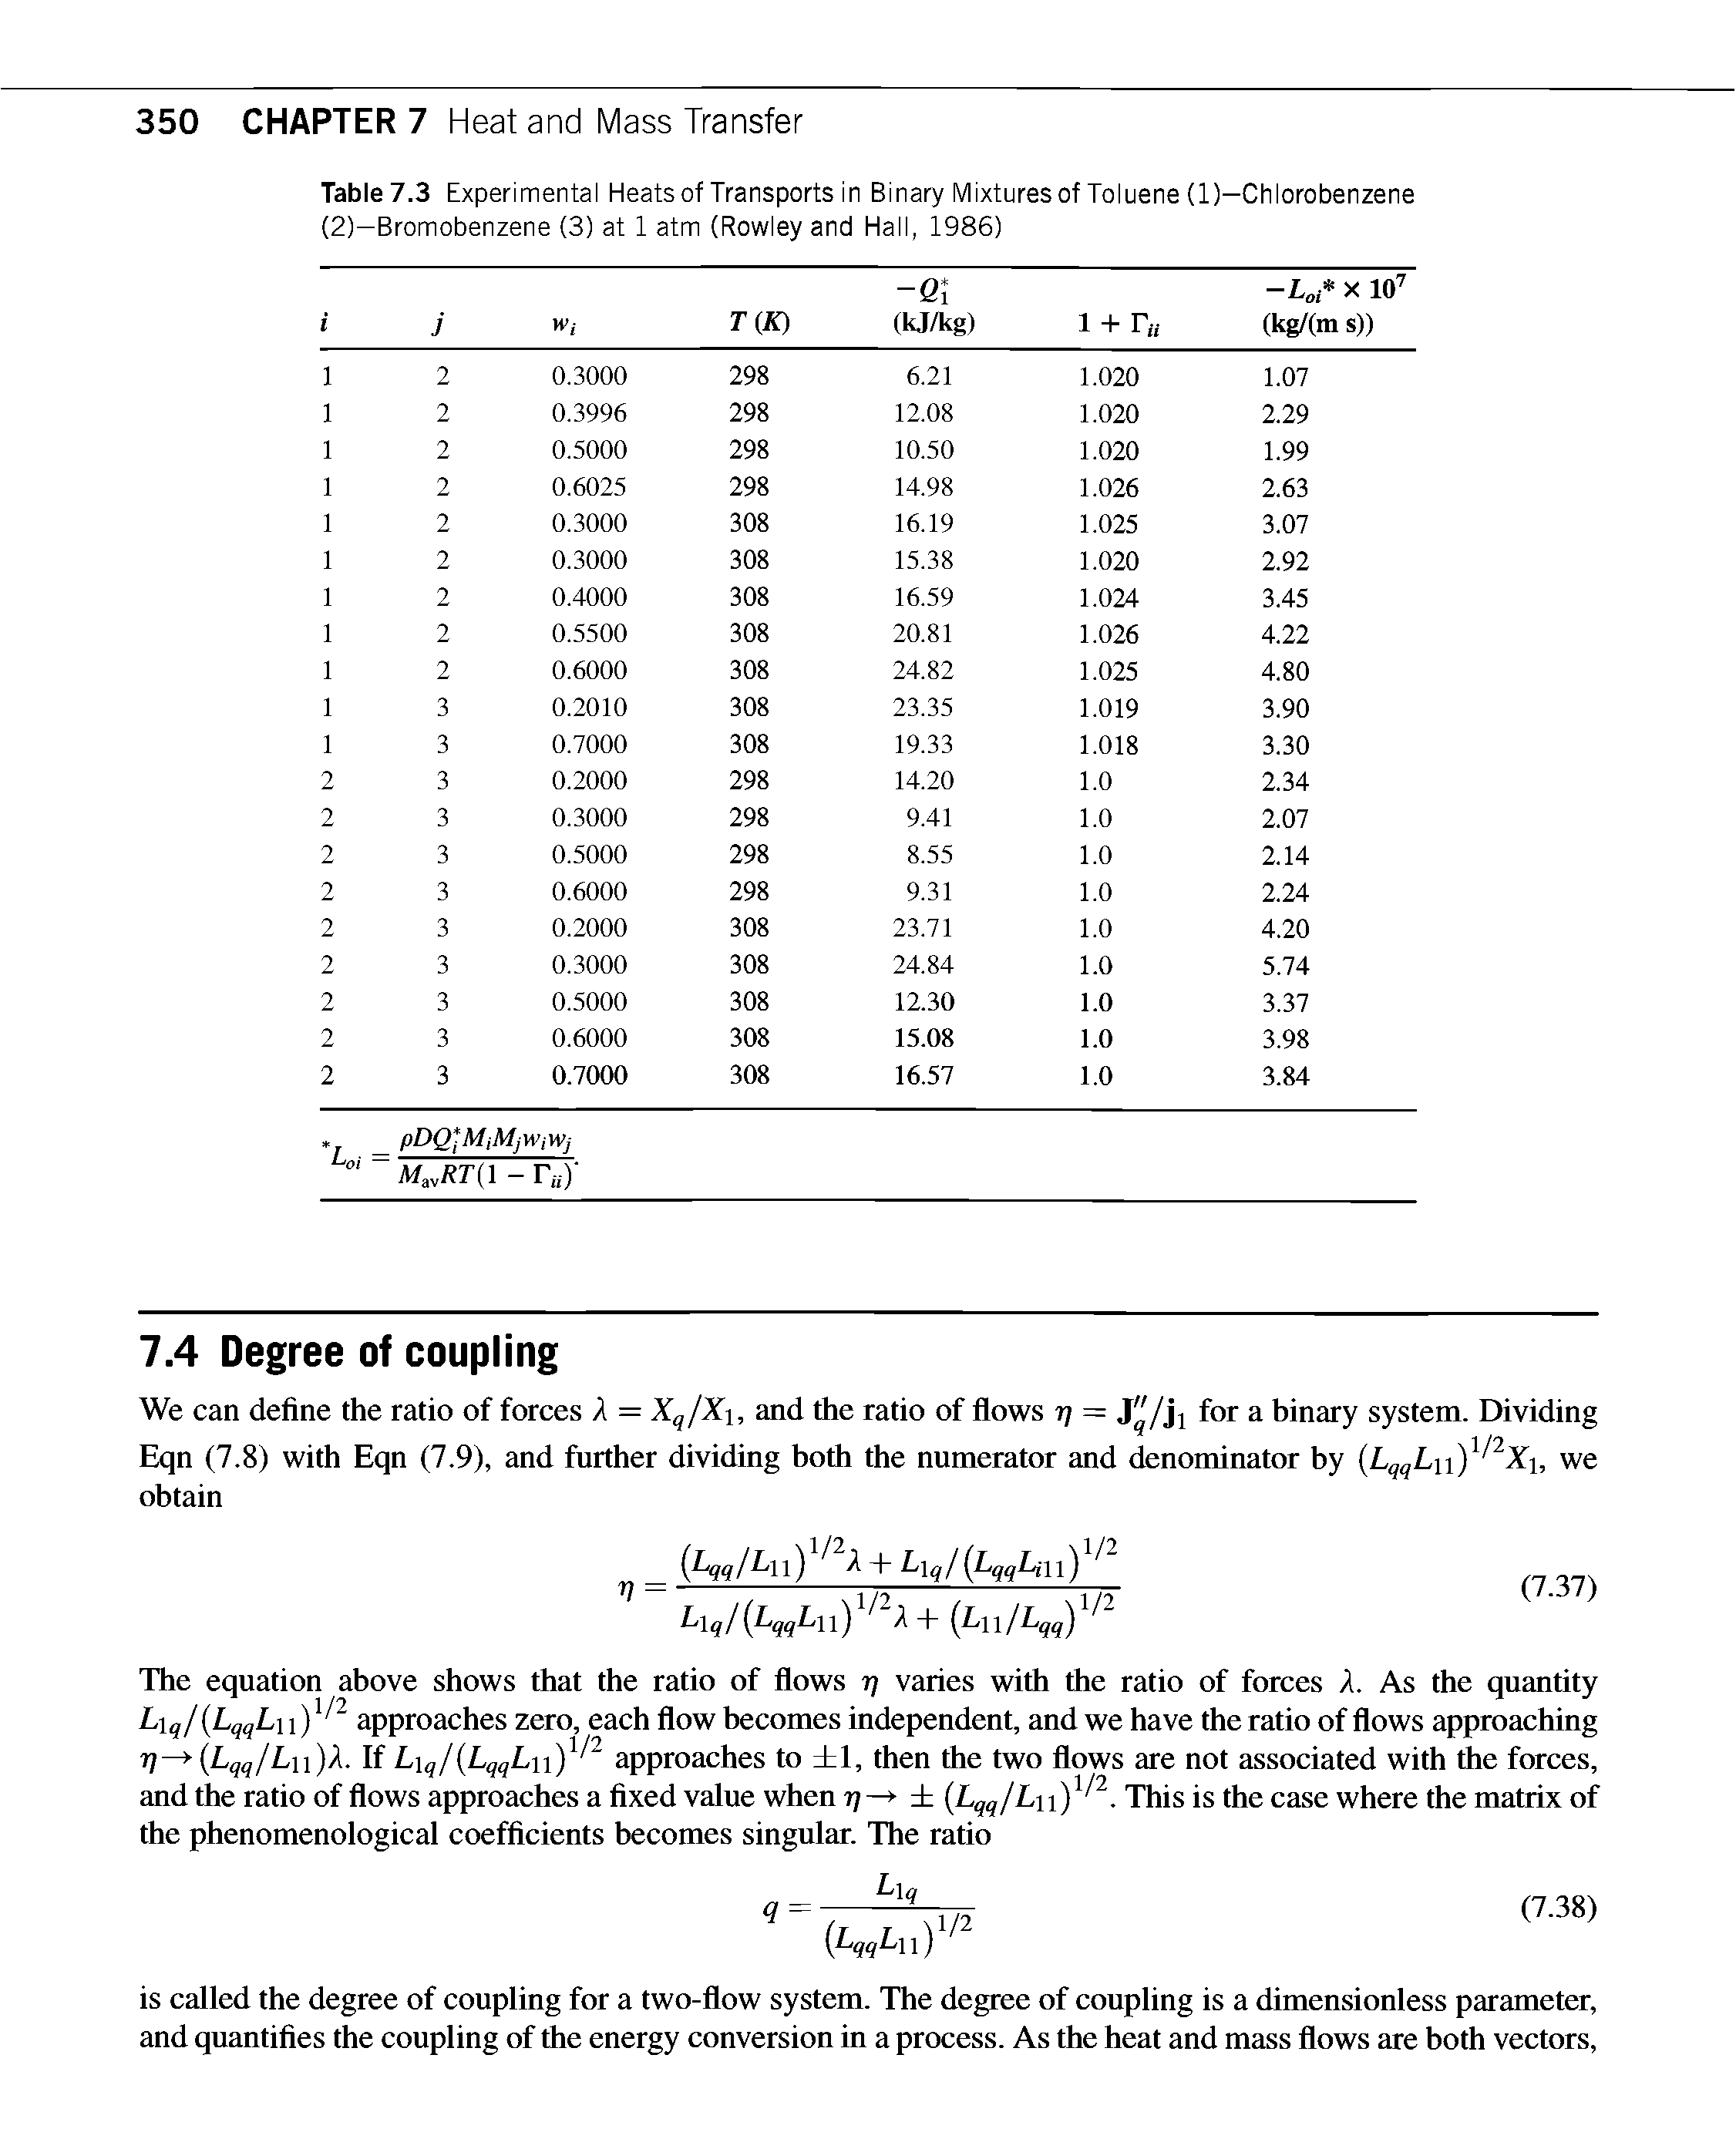 Table 7.3 Experimental Heatsof Transports in Binary Mixtures of Toluene (1)—Chlorobenzene (2)—Bromobenzene (3) at 1 atm (Rowley and Hall, 1986)...